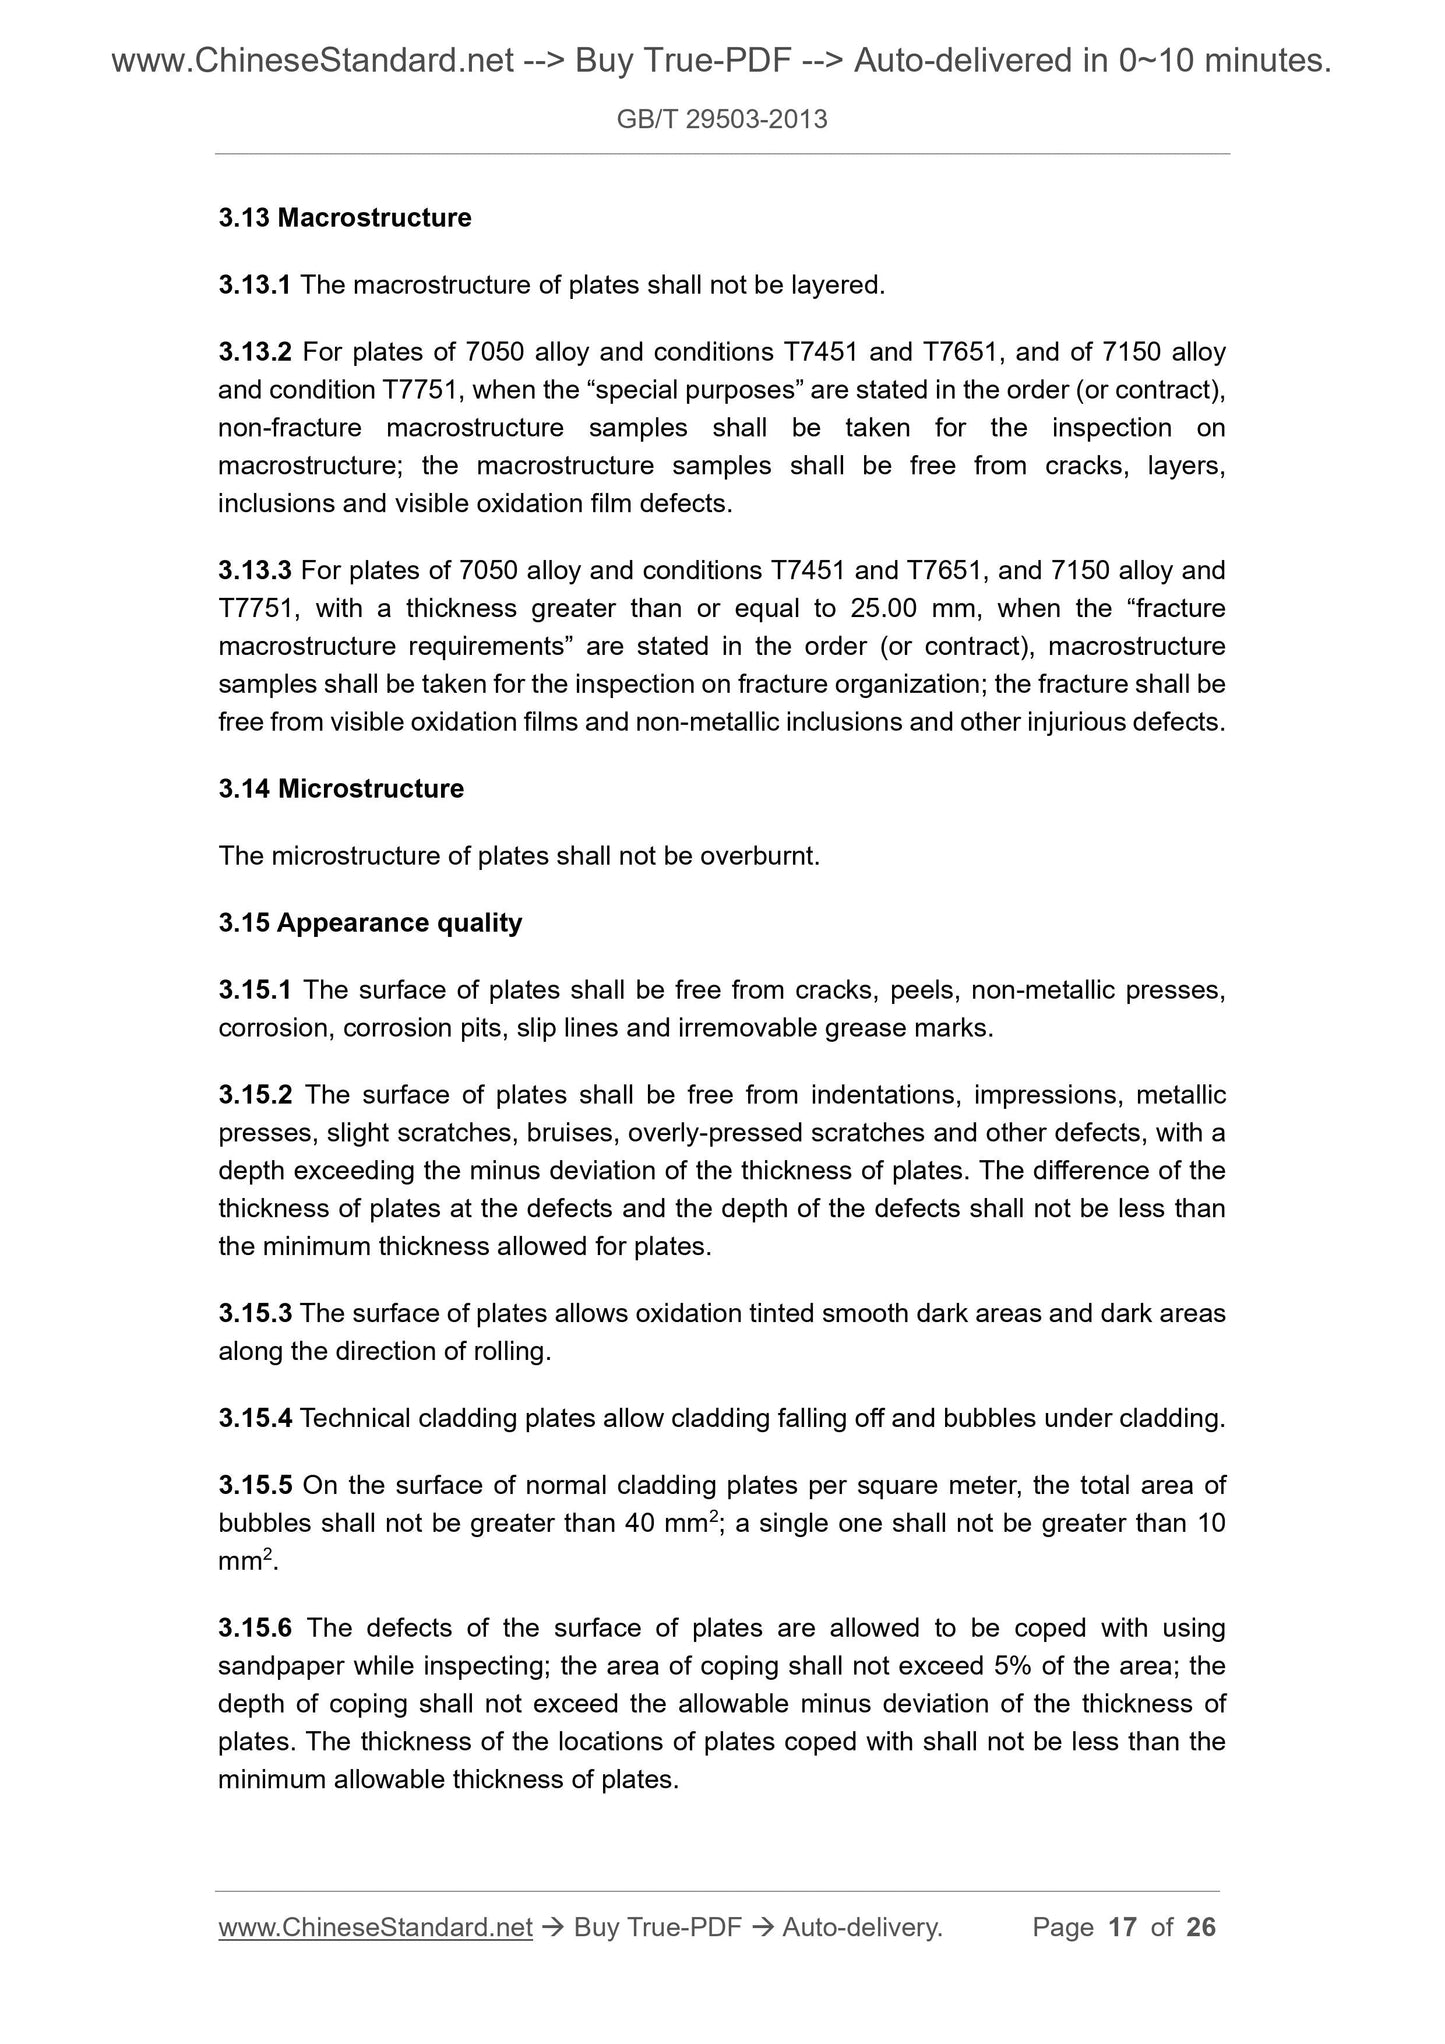 GB/T 29503-2013 Page 4